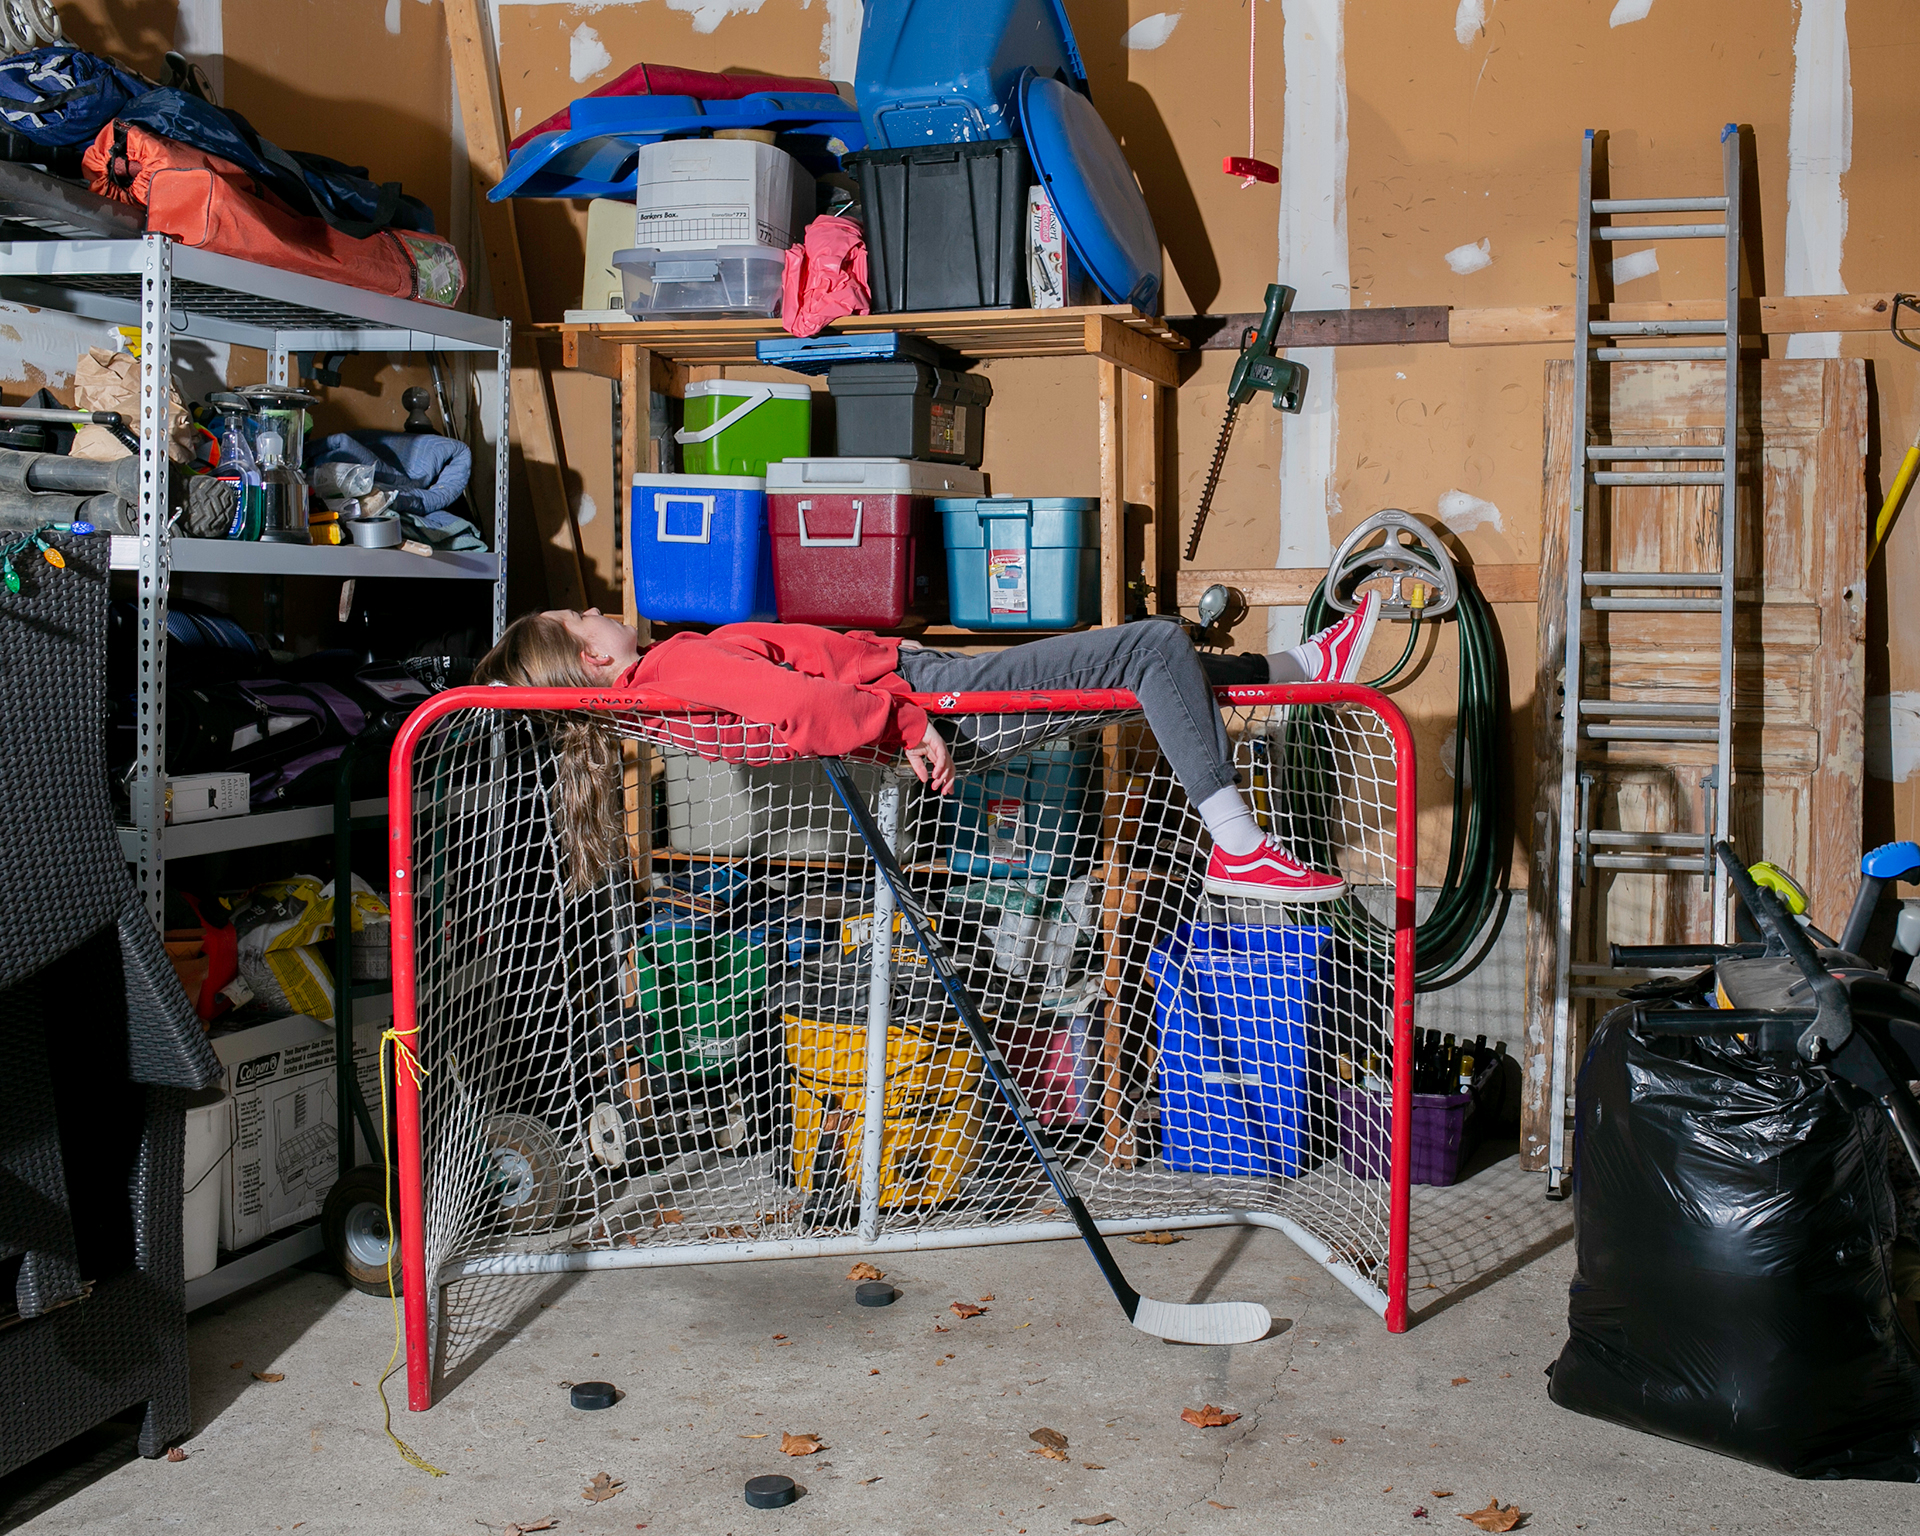 A person lies on top of a hockey net in a garage space. There is a storage shelf with various items on it behind the net. There are some pucks and leaves spread out on the ground.